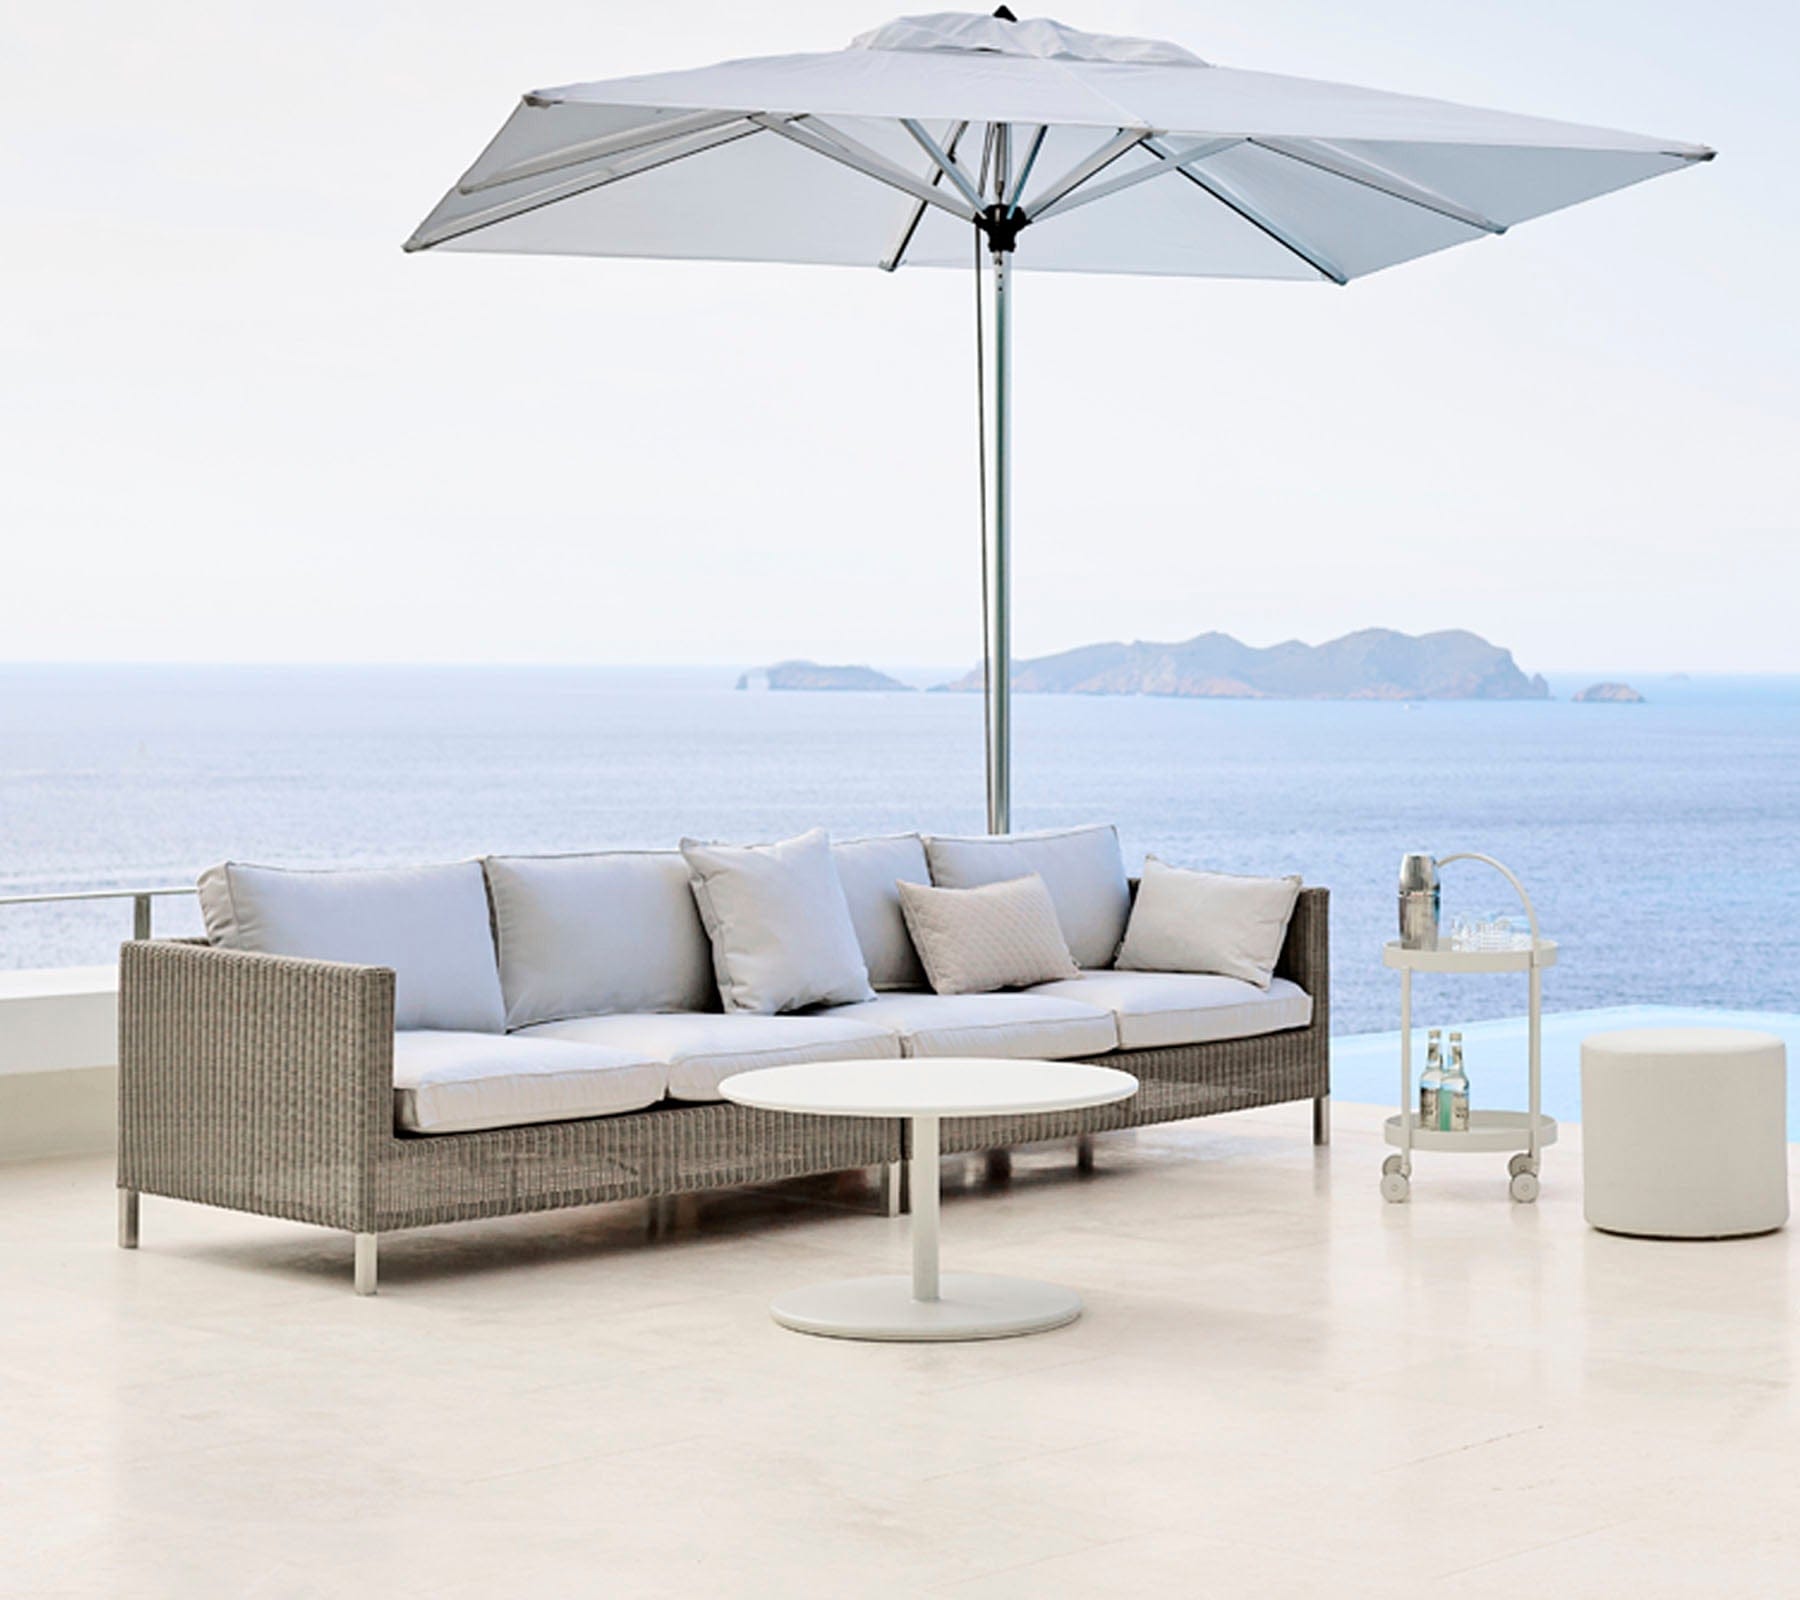 Boxhill's Connect 2-Seater Left Module Sofa lifestyle image with Connect 2-Seater Right Module Sofa with a big umbrella sunshade at seafront